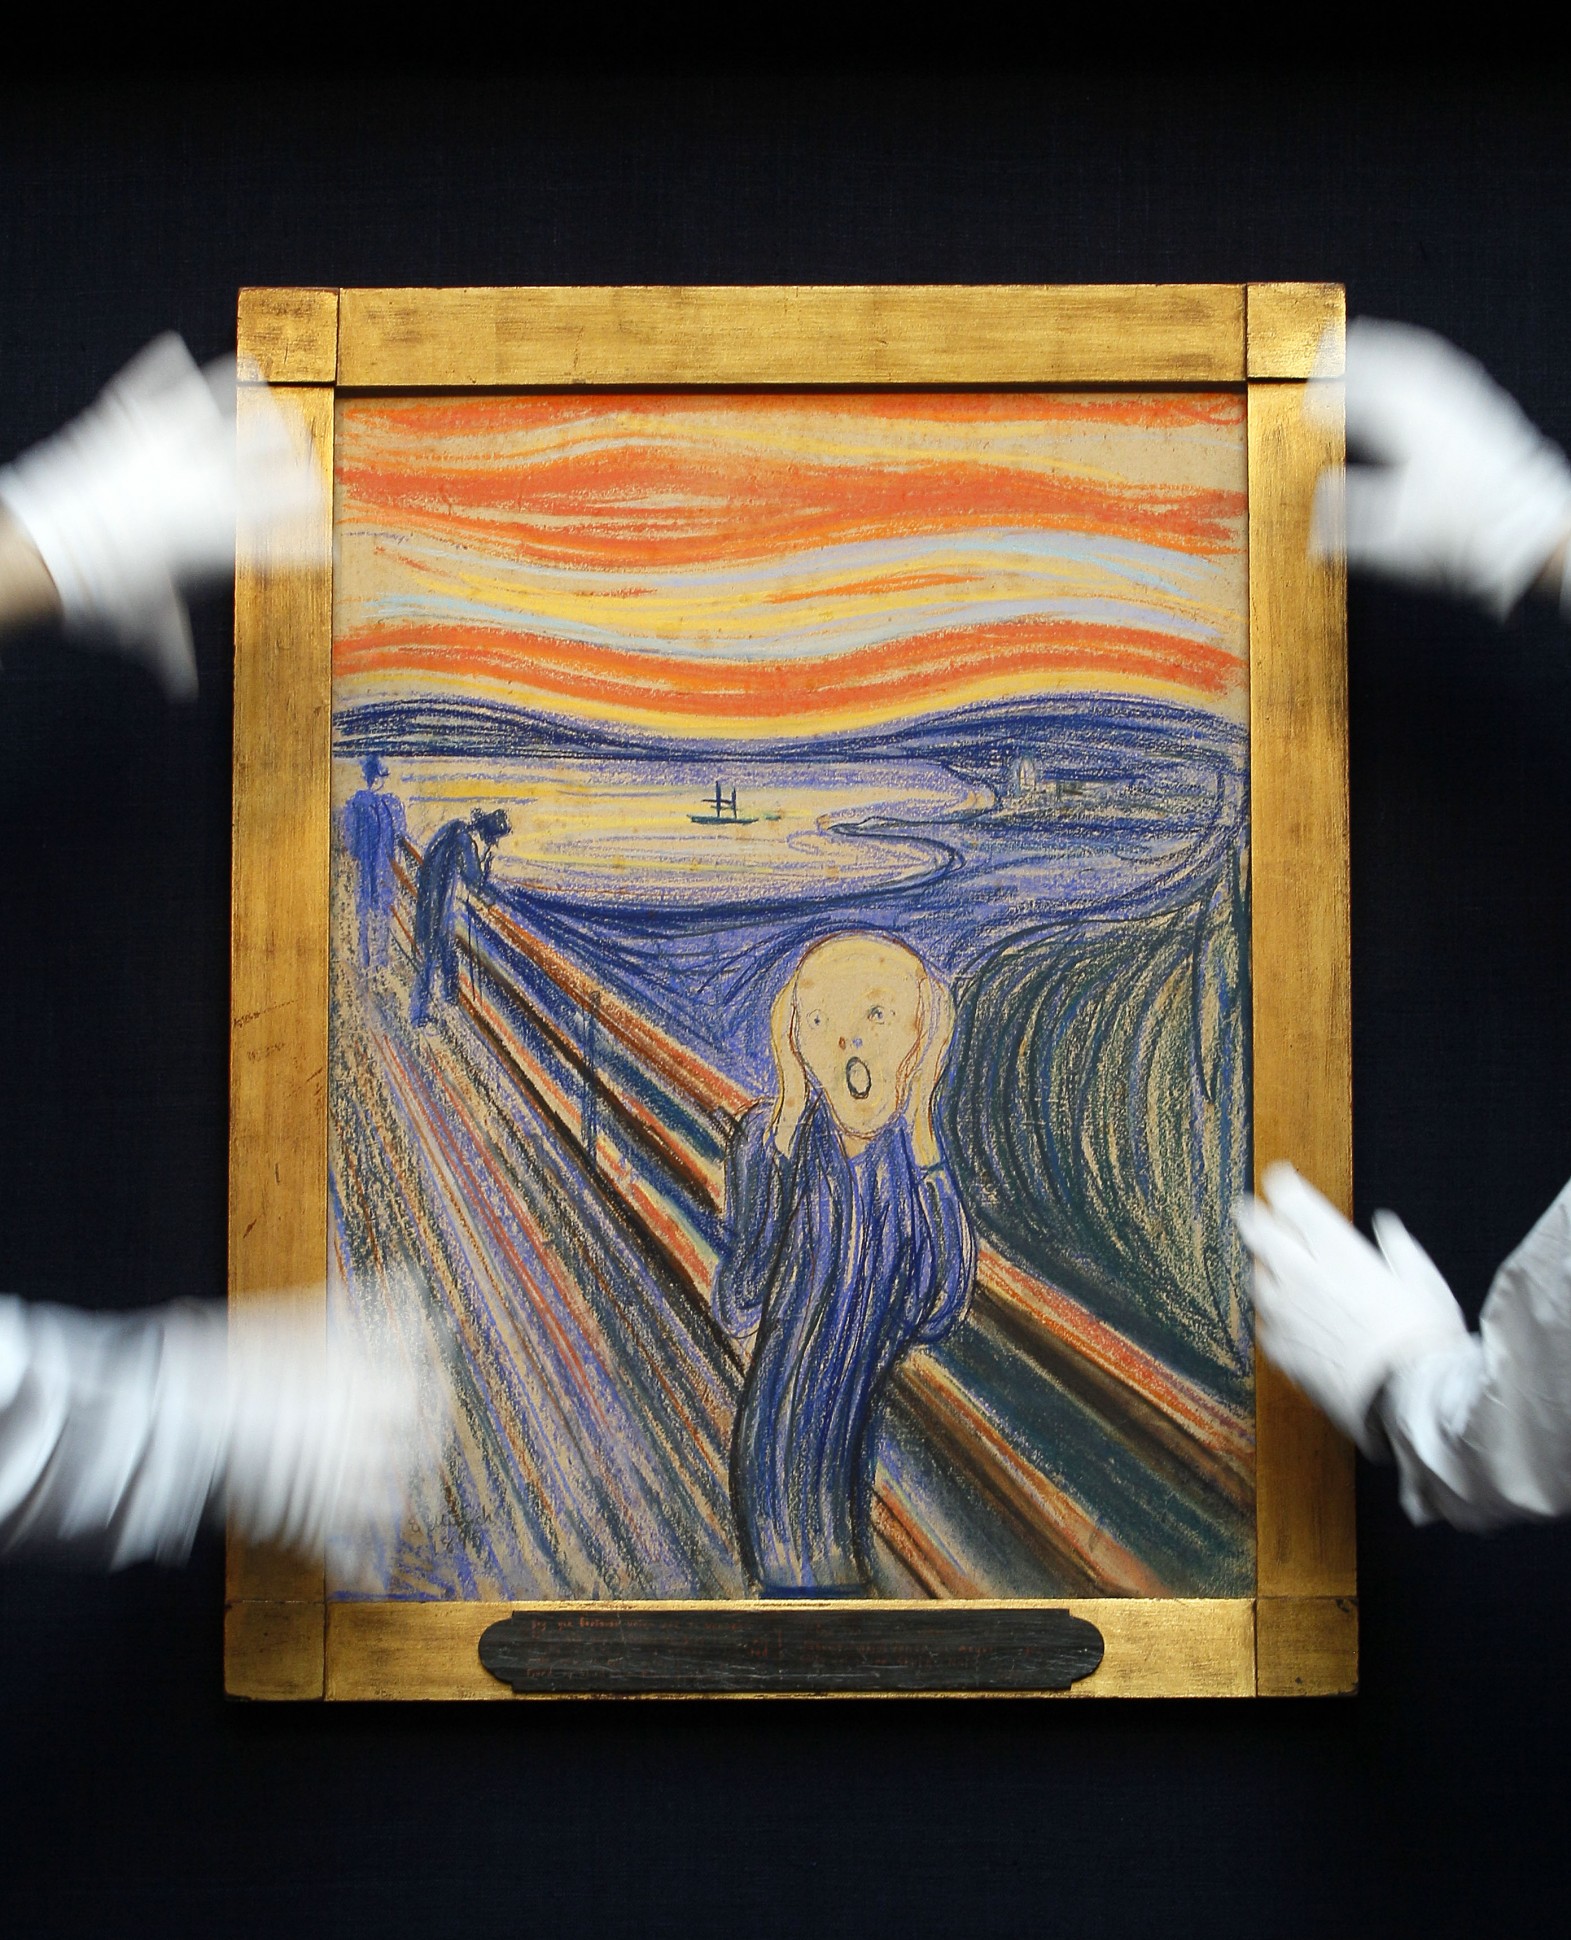 Top Five Most Expensive Items Ever Sold by Sotheby's